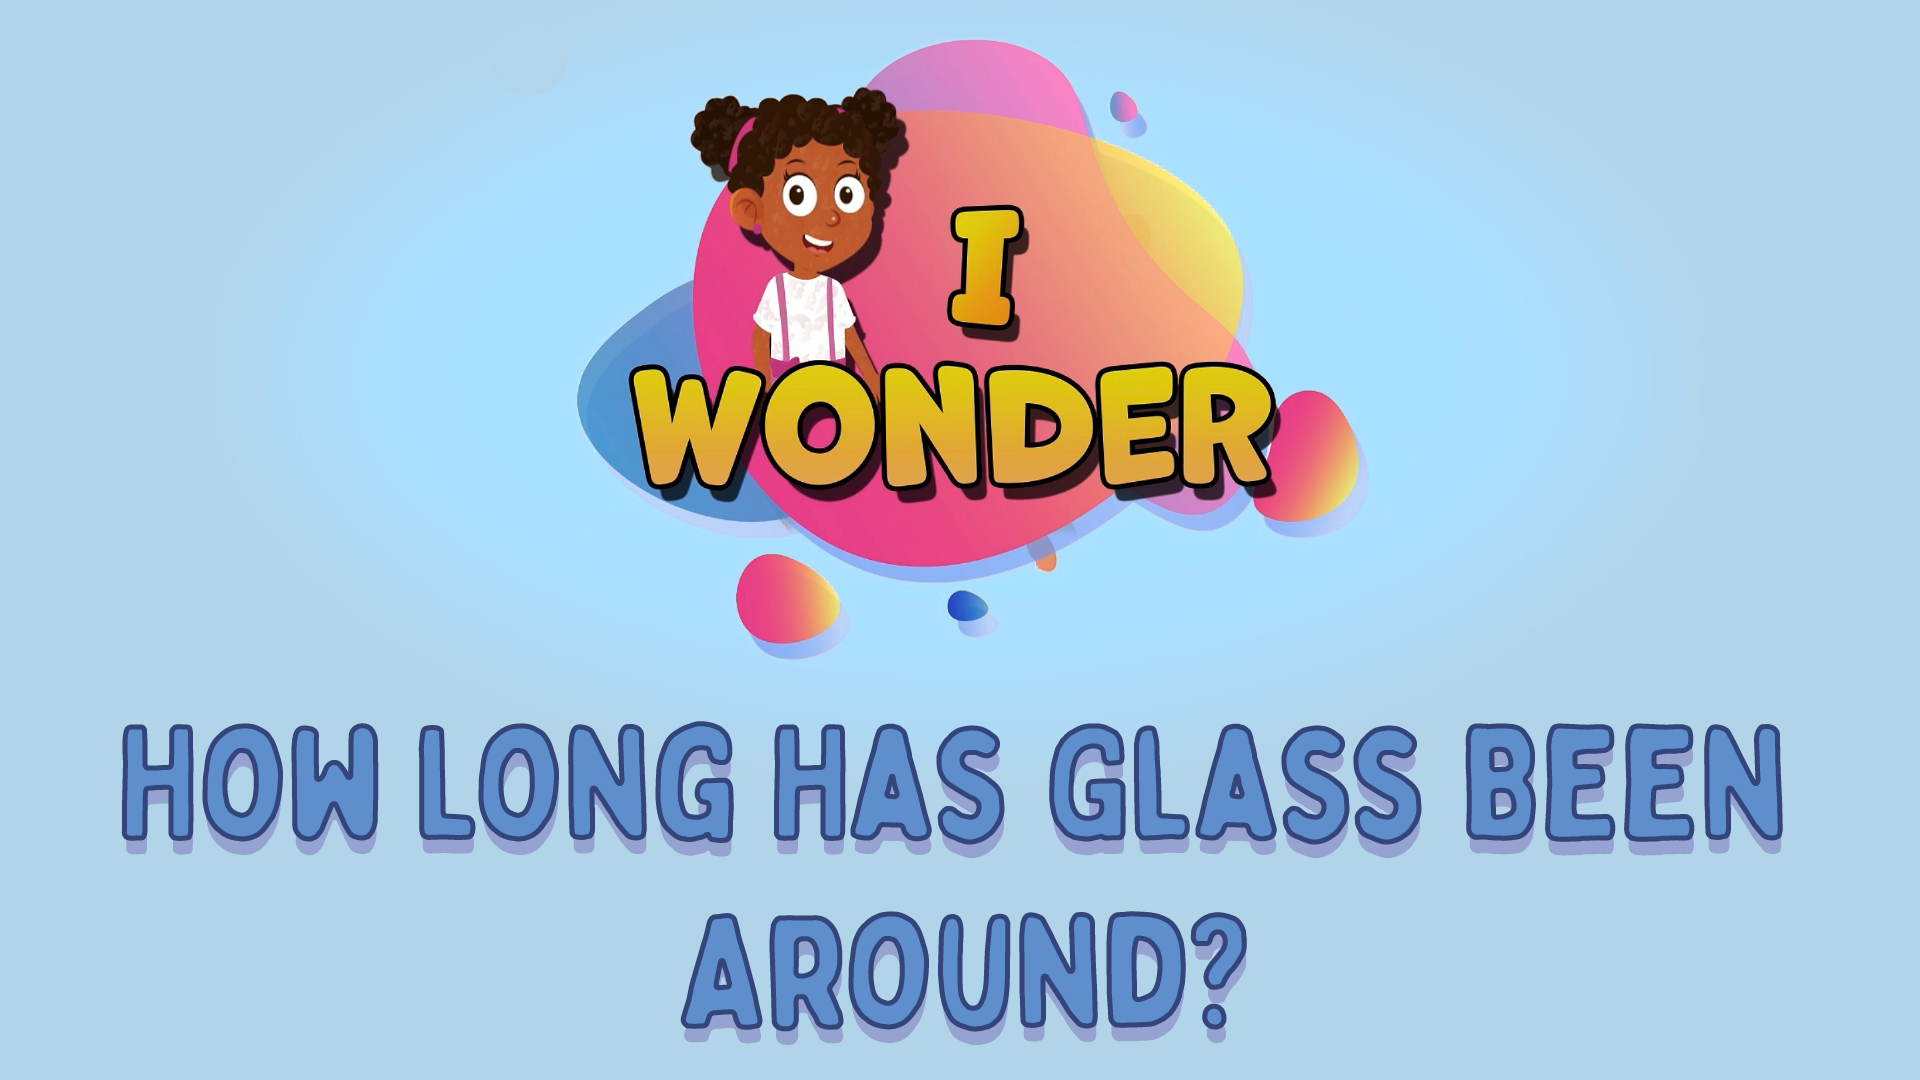 How Long Has Glass Been Around?